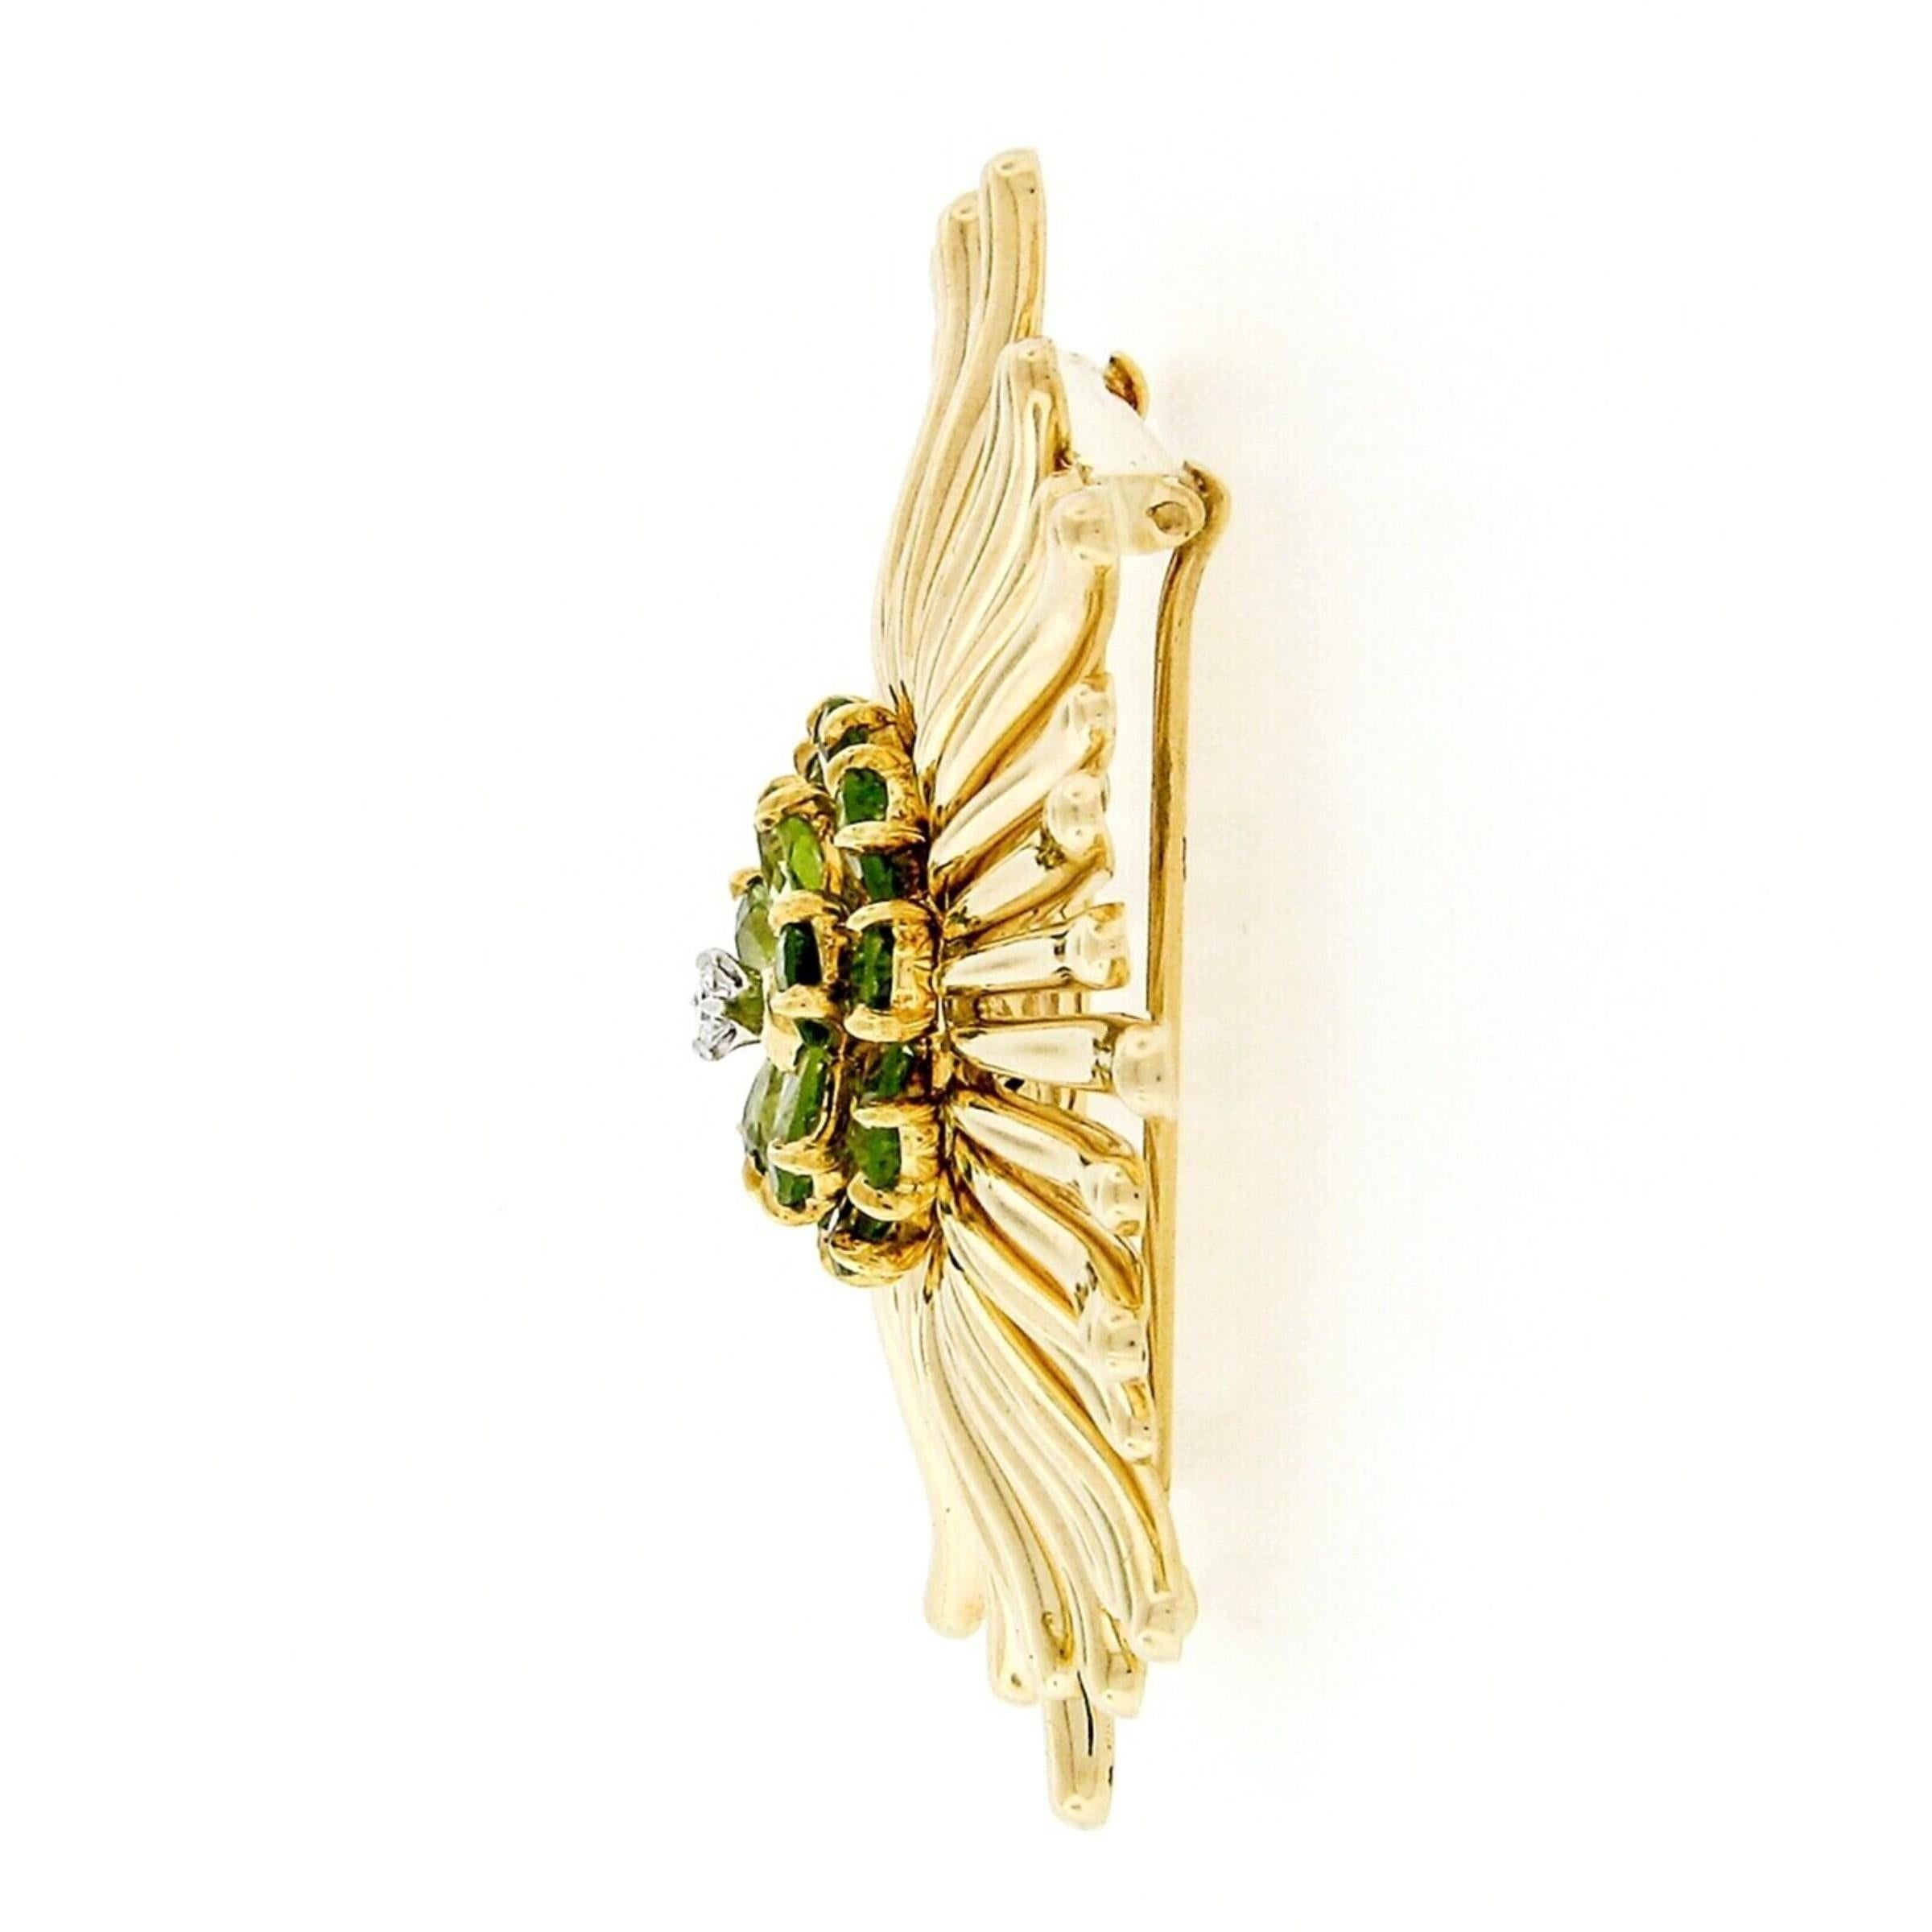 Vintage Retro 14K Gold Peridot & Diamond Cluster Radiating Spray Flower Brooch In Good Condition For Sale In Montclair, NJ